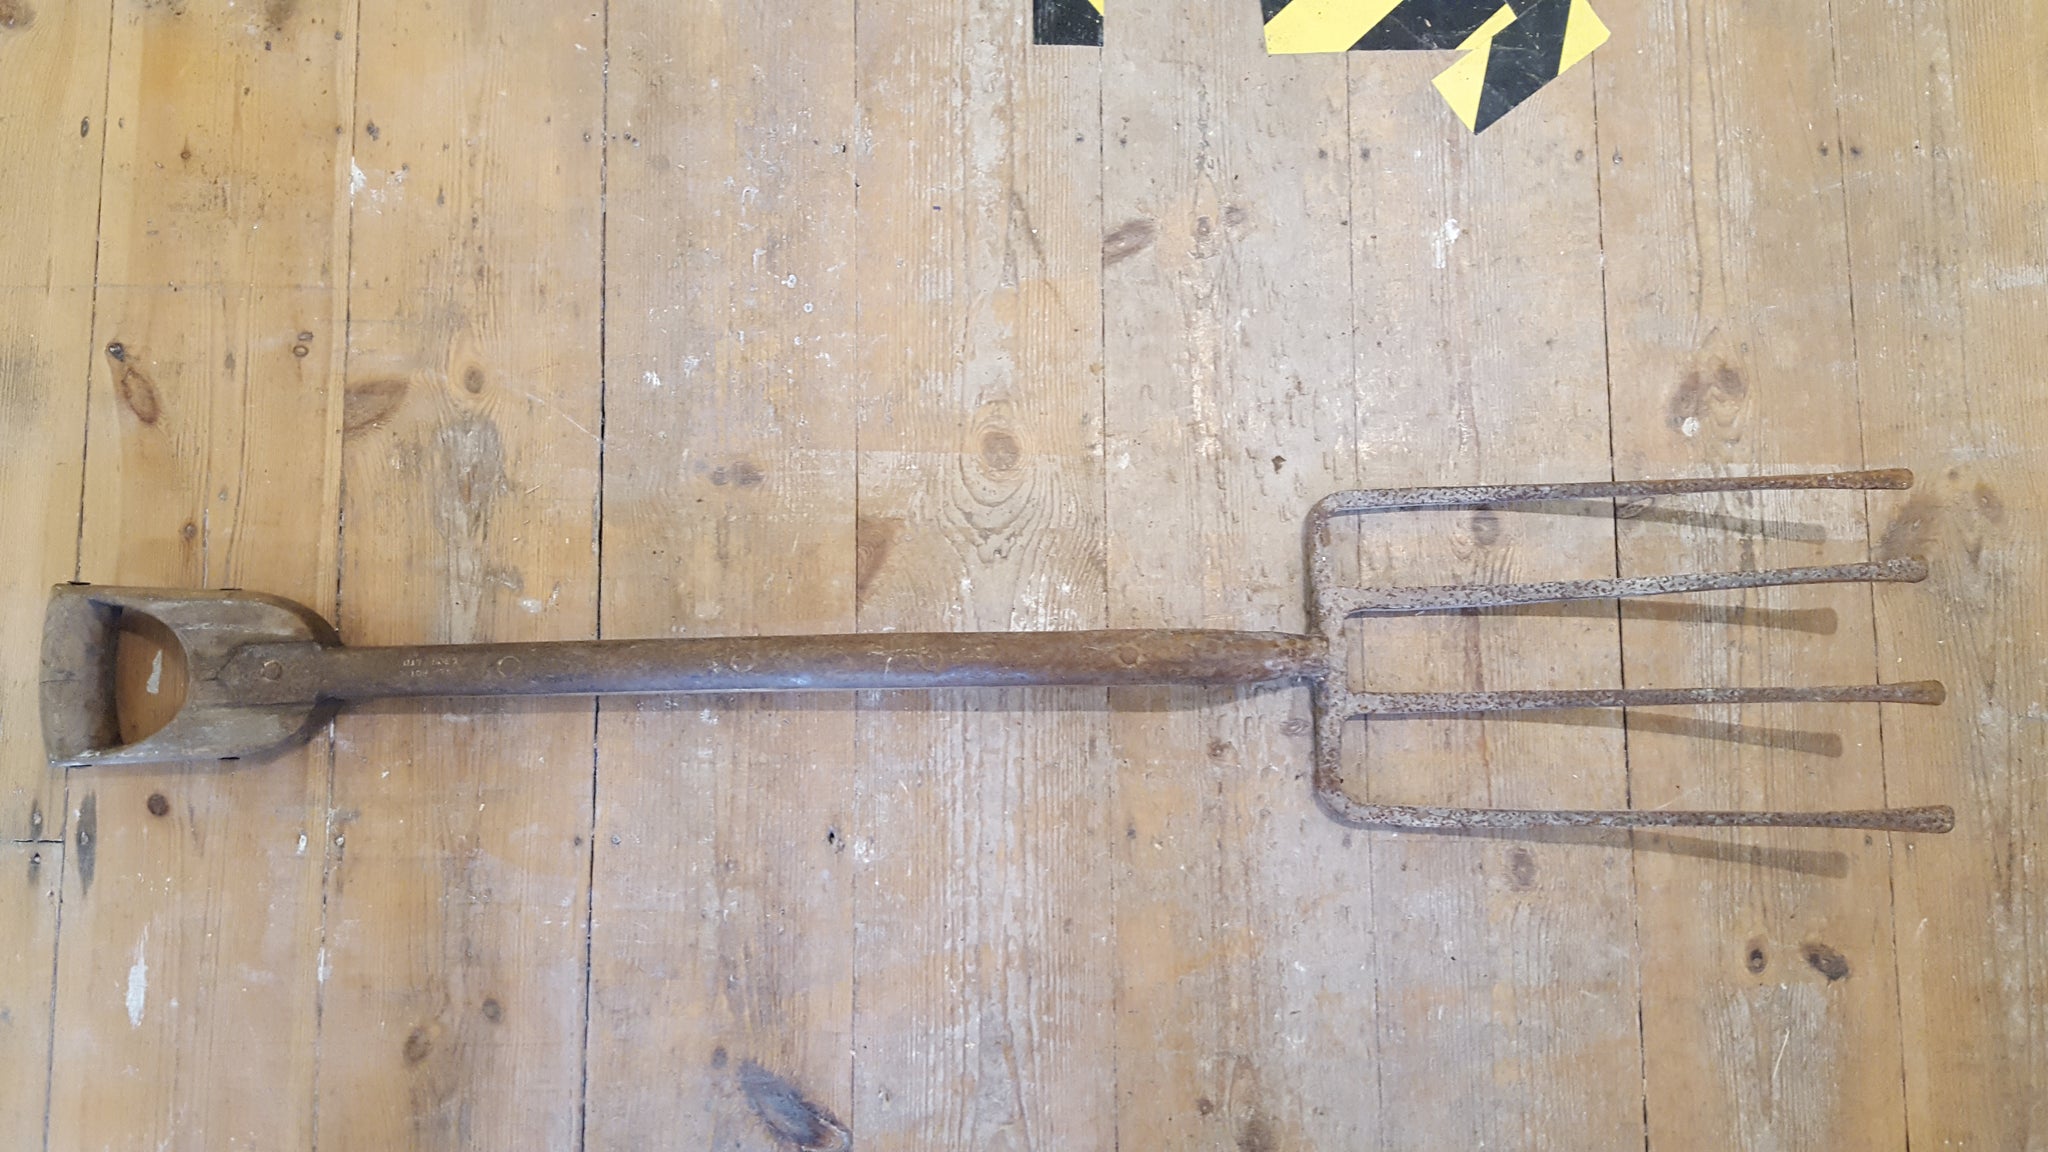 Large 45" Strapped Garden Fork w 8 1/2" Head 39906